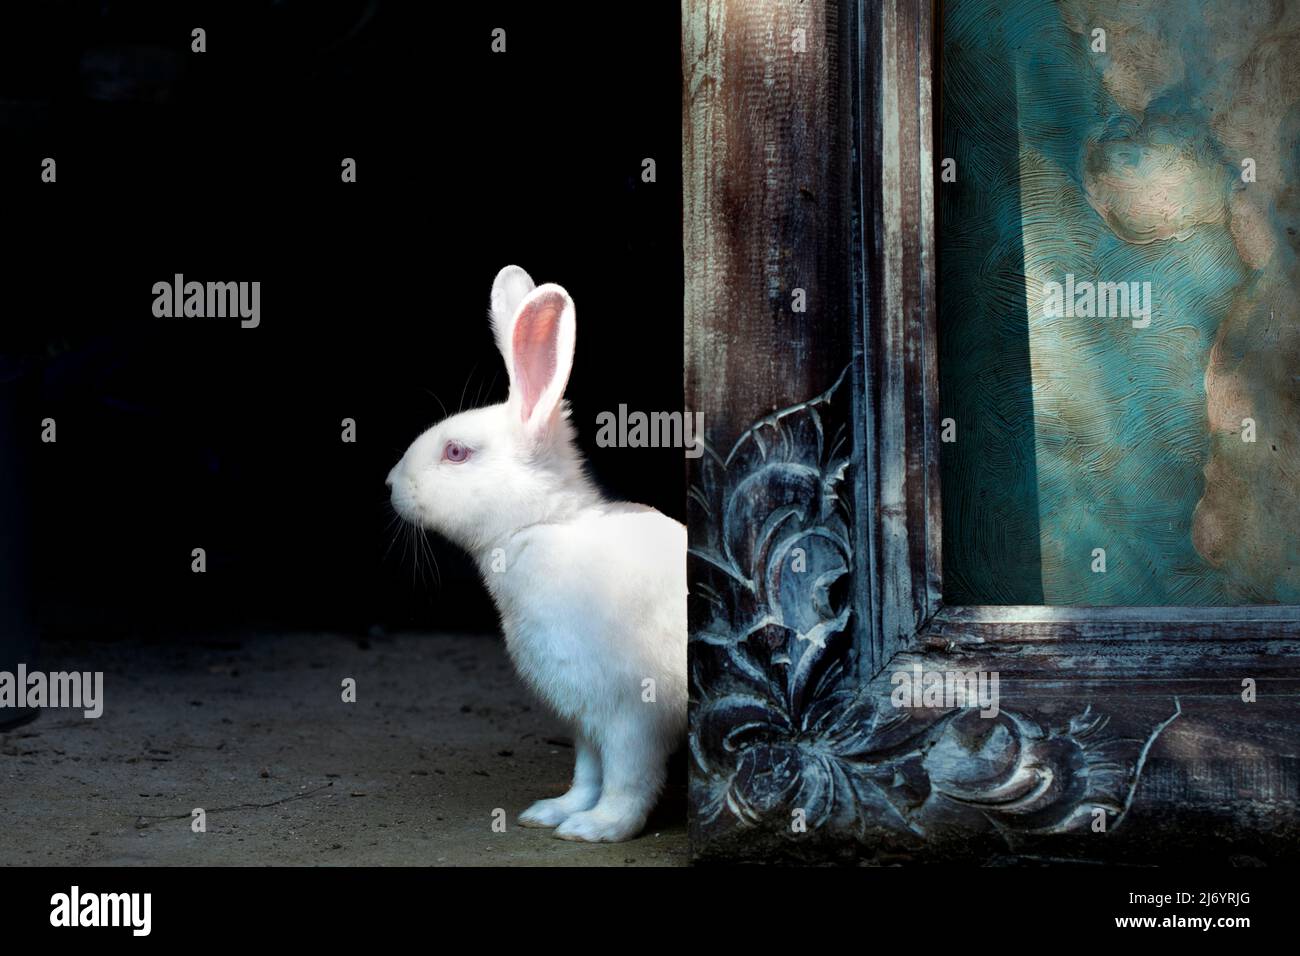 Rabbit appearing from behind a framed painting. Stock Photo